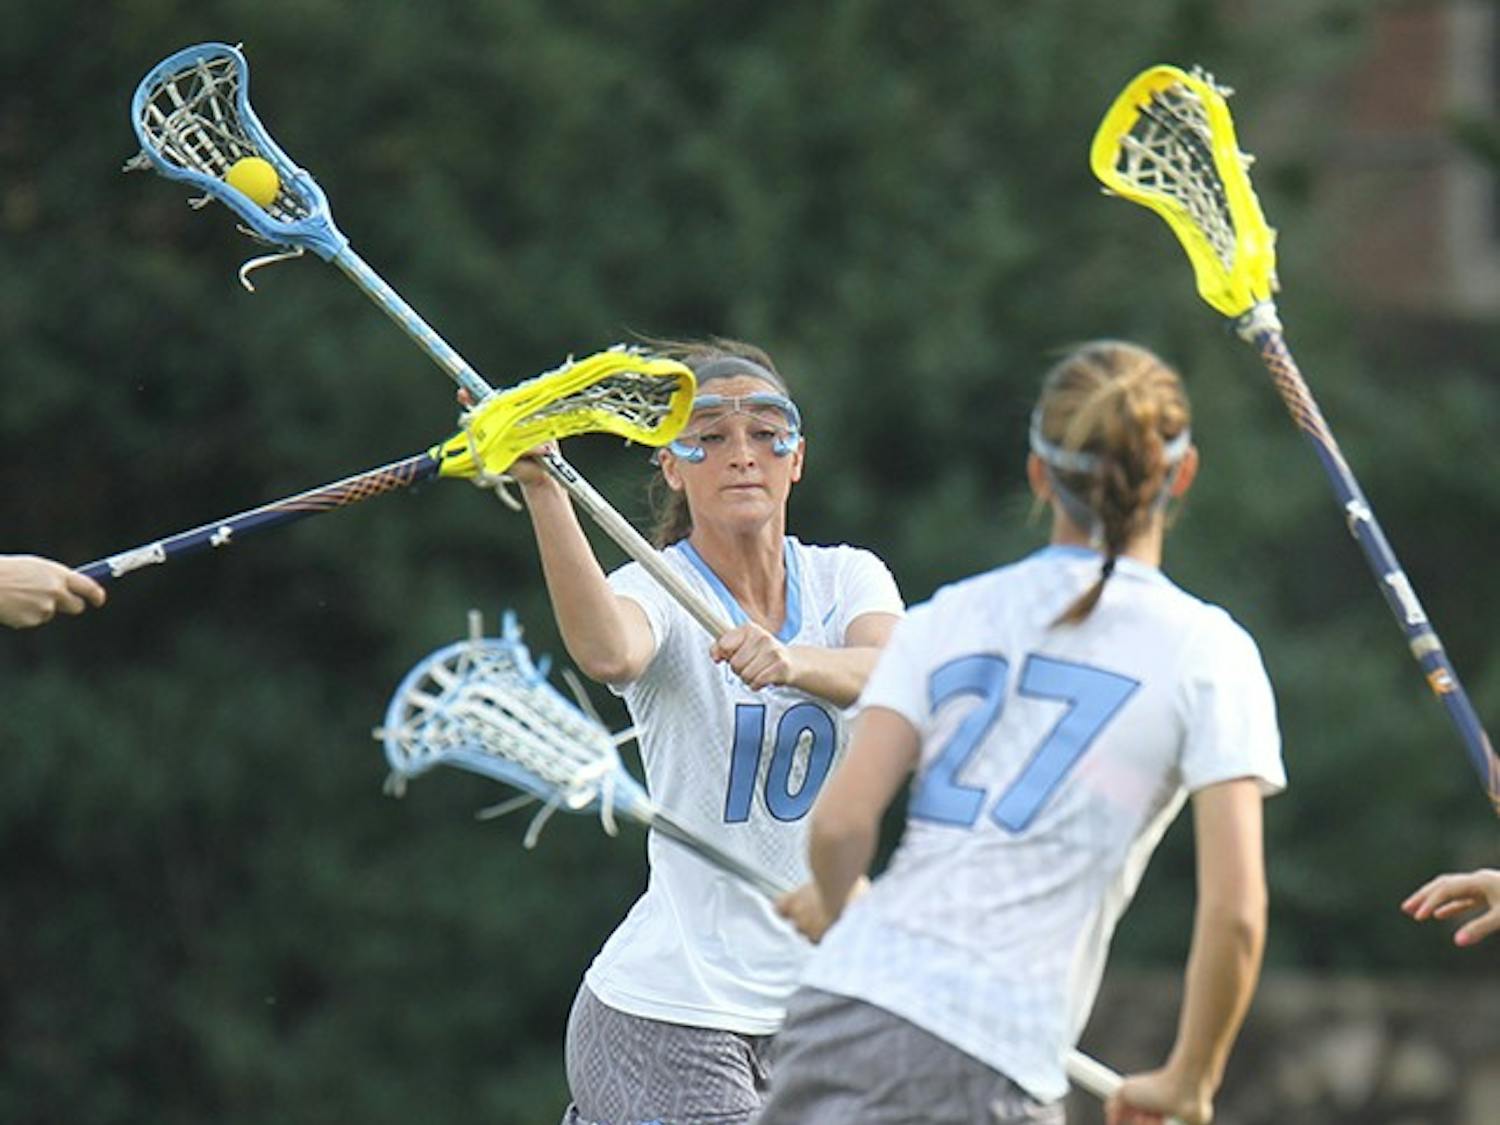 	Freshman attacker Sydney Holman scored the first goal Saturday against Georgetown. She finished with a hat trick in the UNC victory.